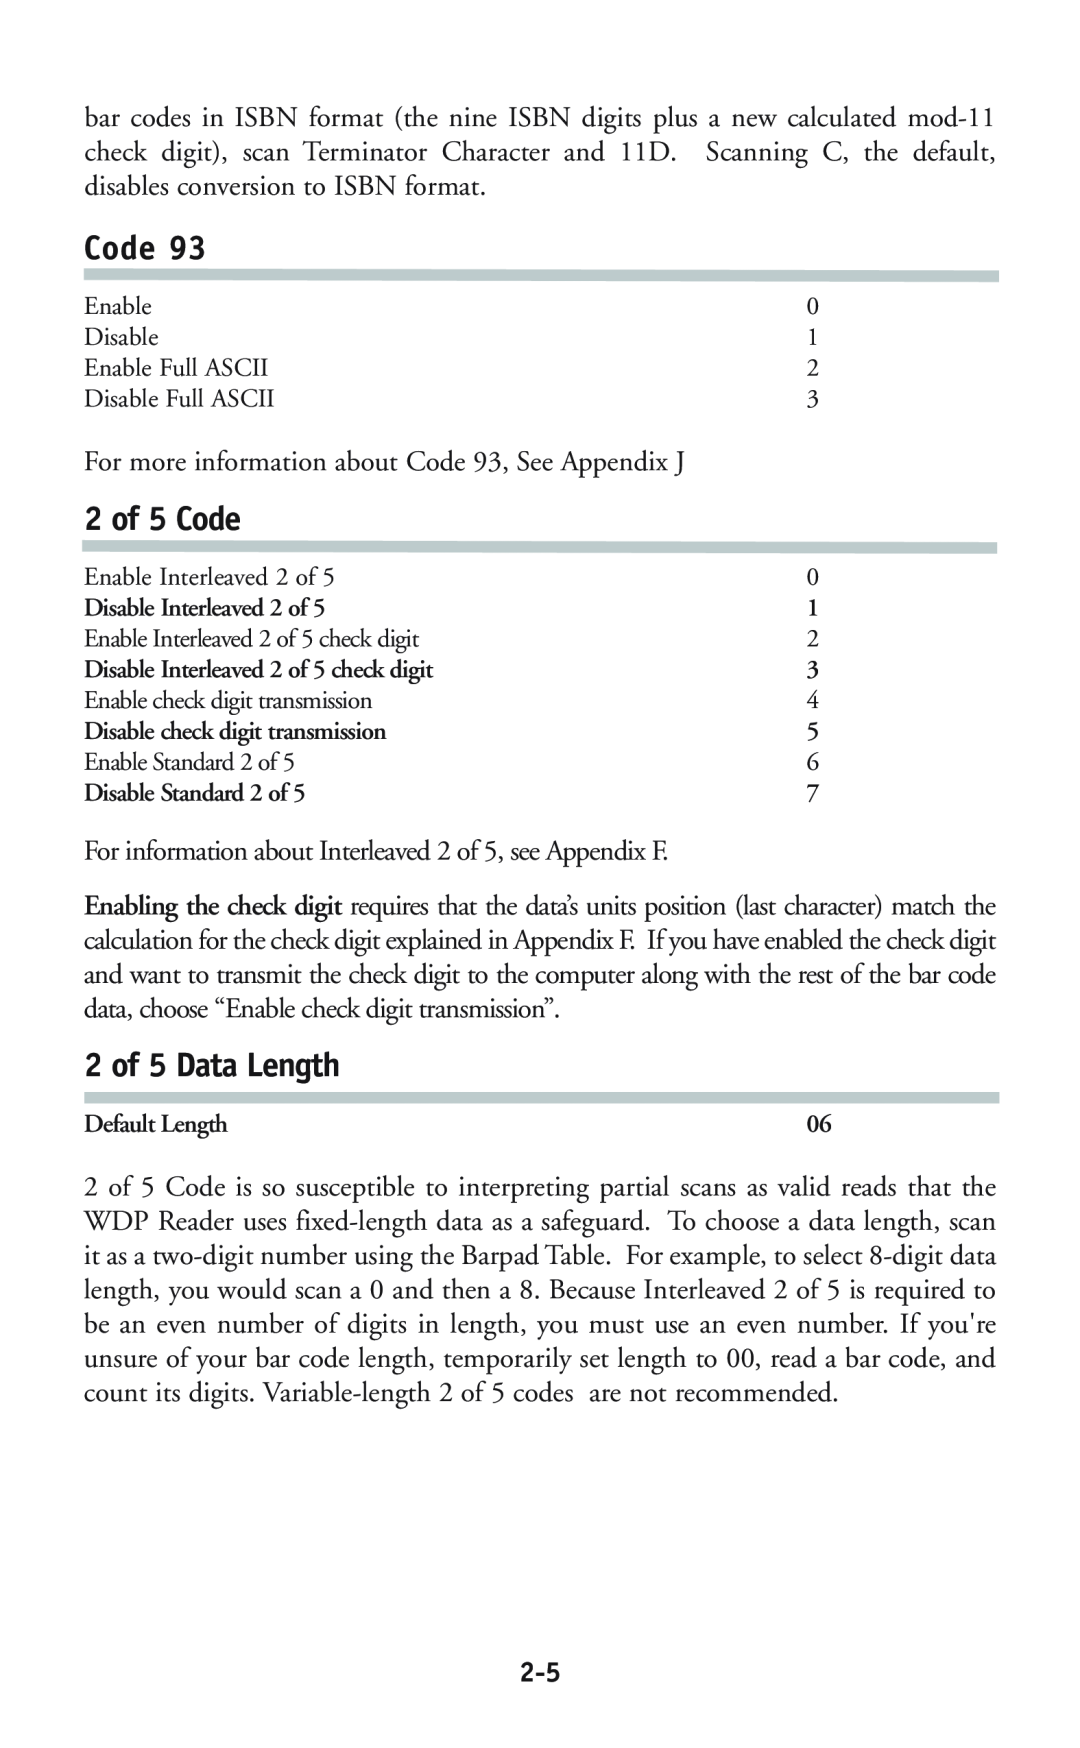 Worth Data P11/12 2 of 5 Code, 2 of 5 Data Length, For more information about Code 93, See Appendix J, Default Length 